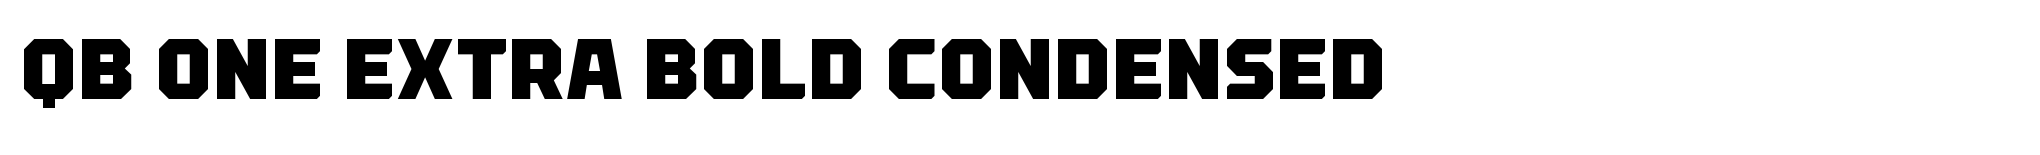 QB One Extra Bold Condensed image